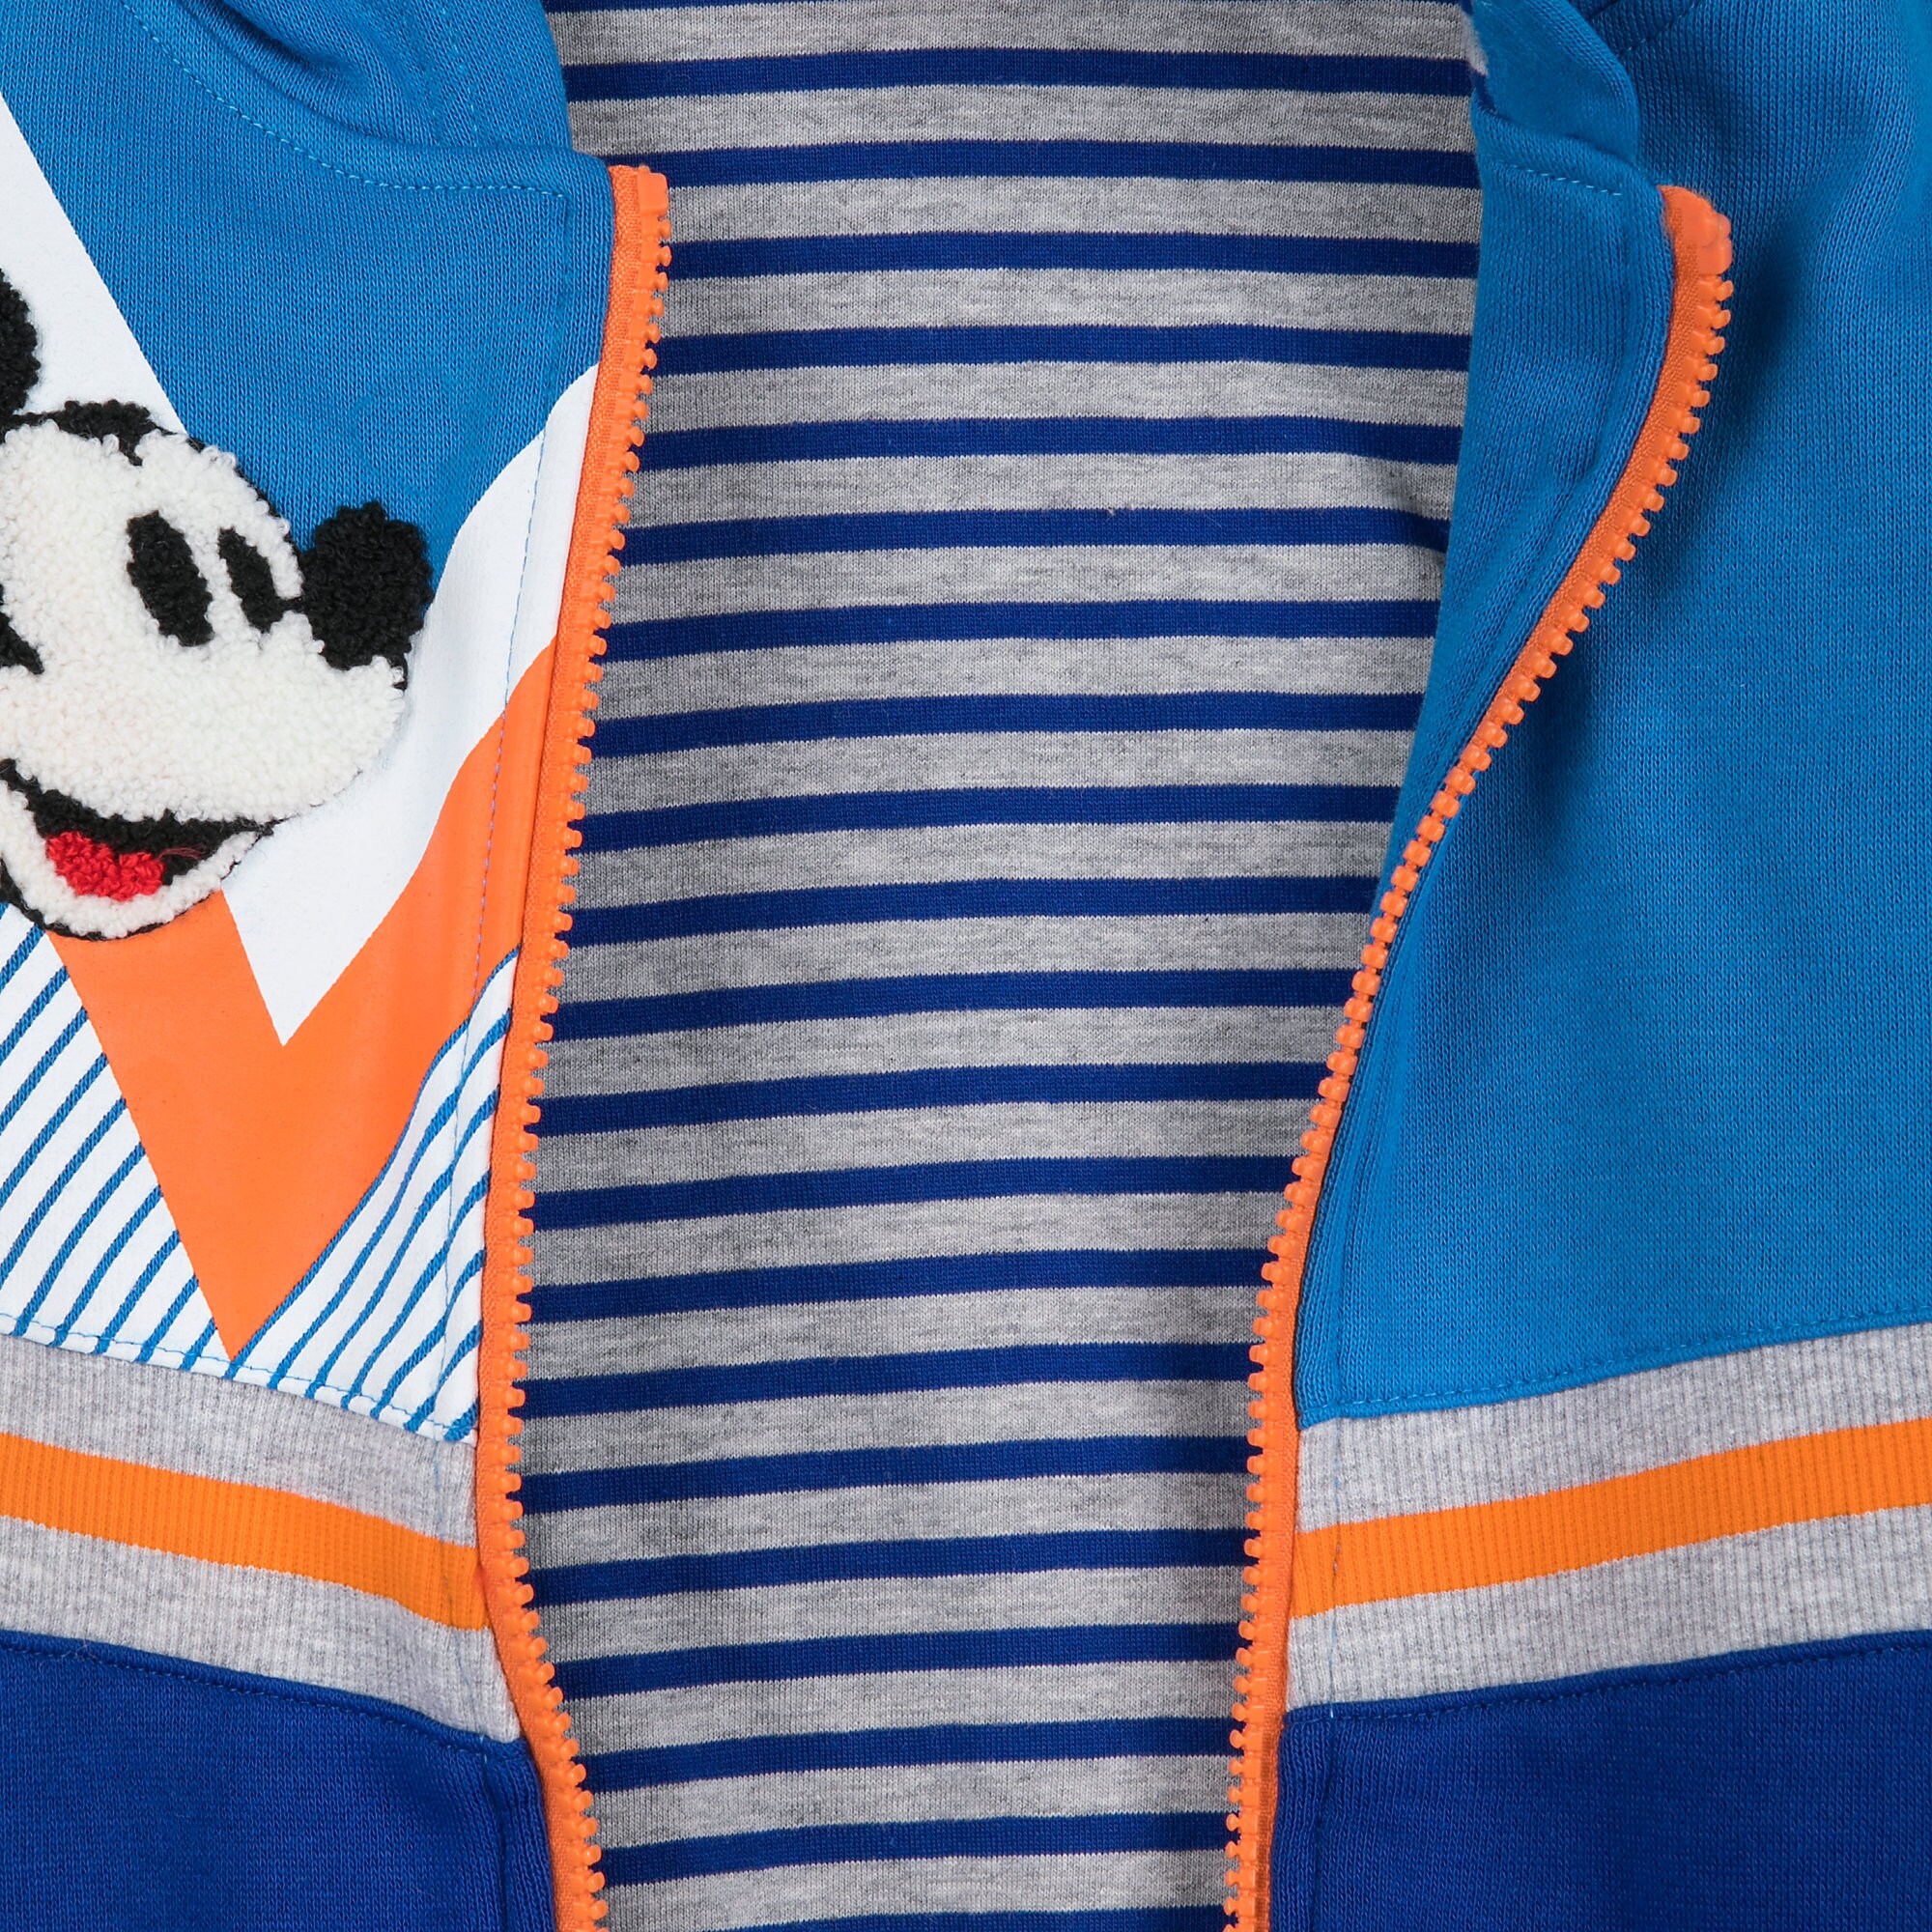 Mickey Mouse Hoodie for Boys